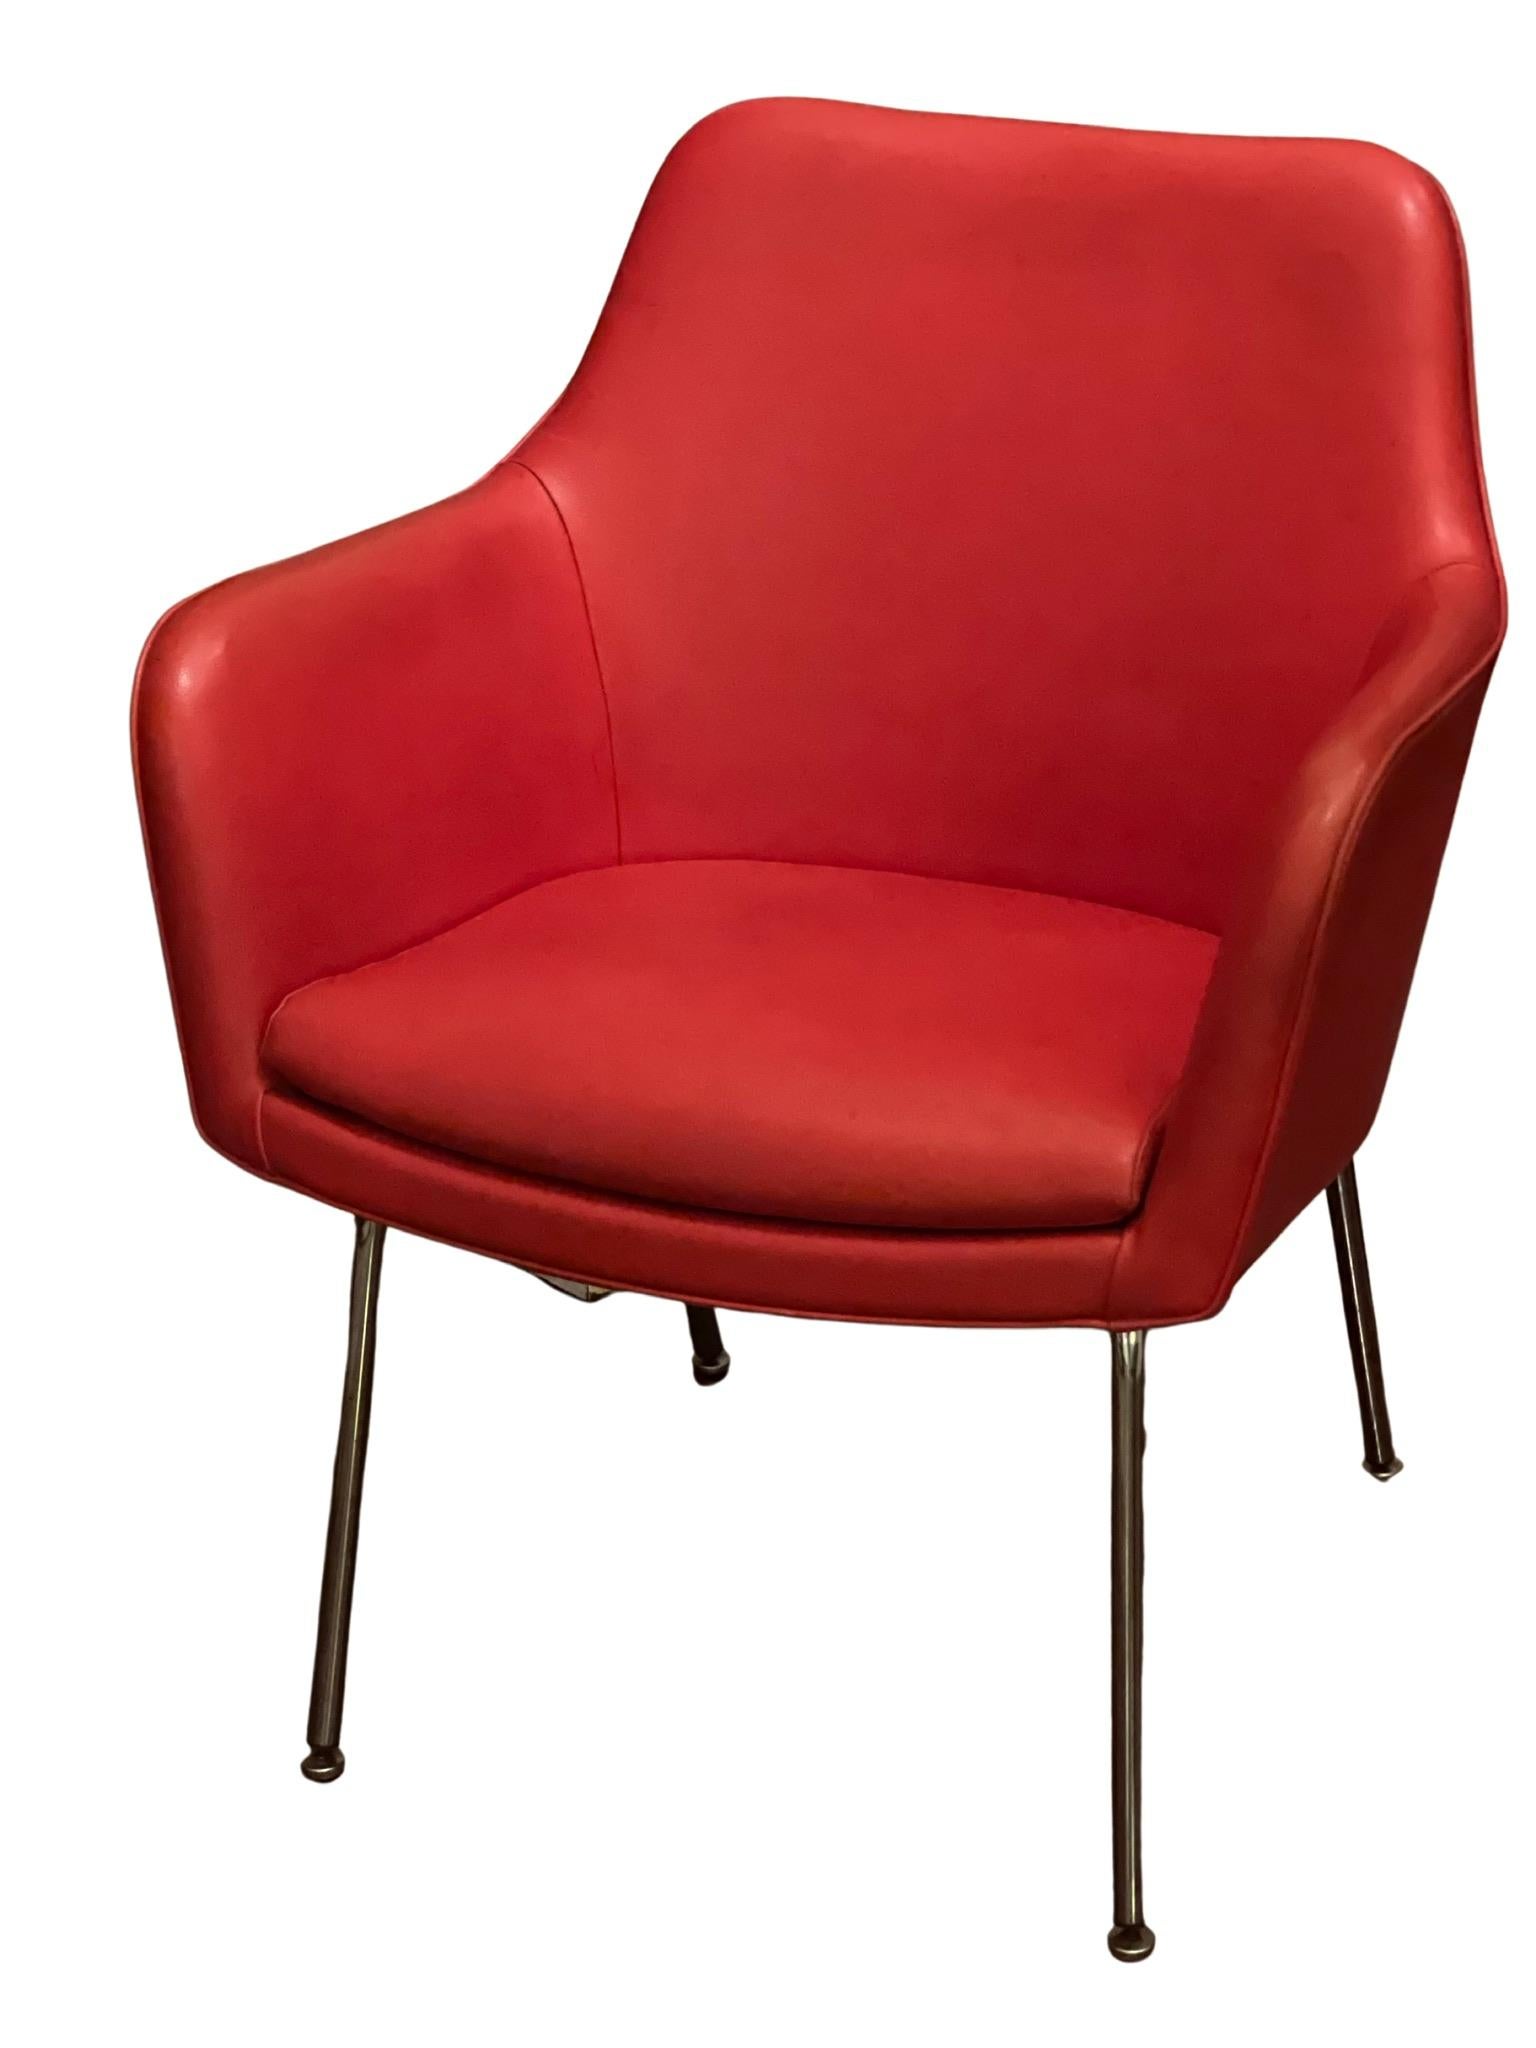 red bucket chair